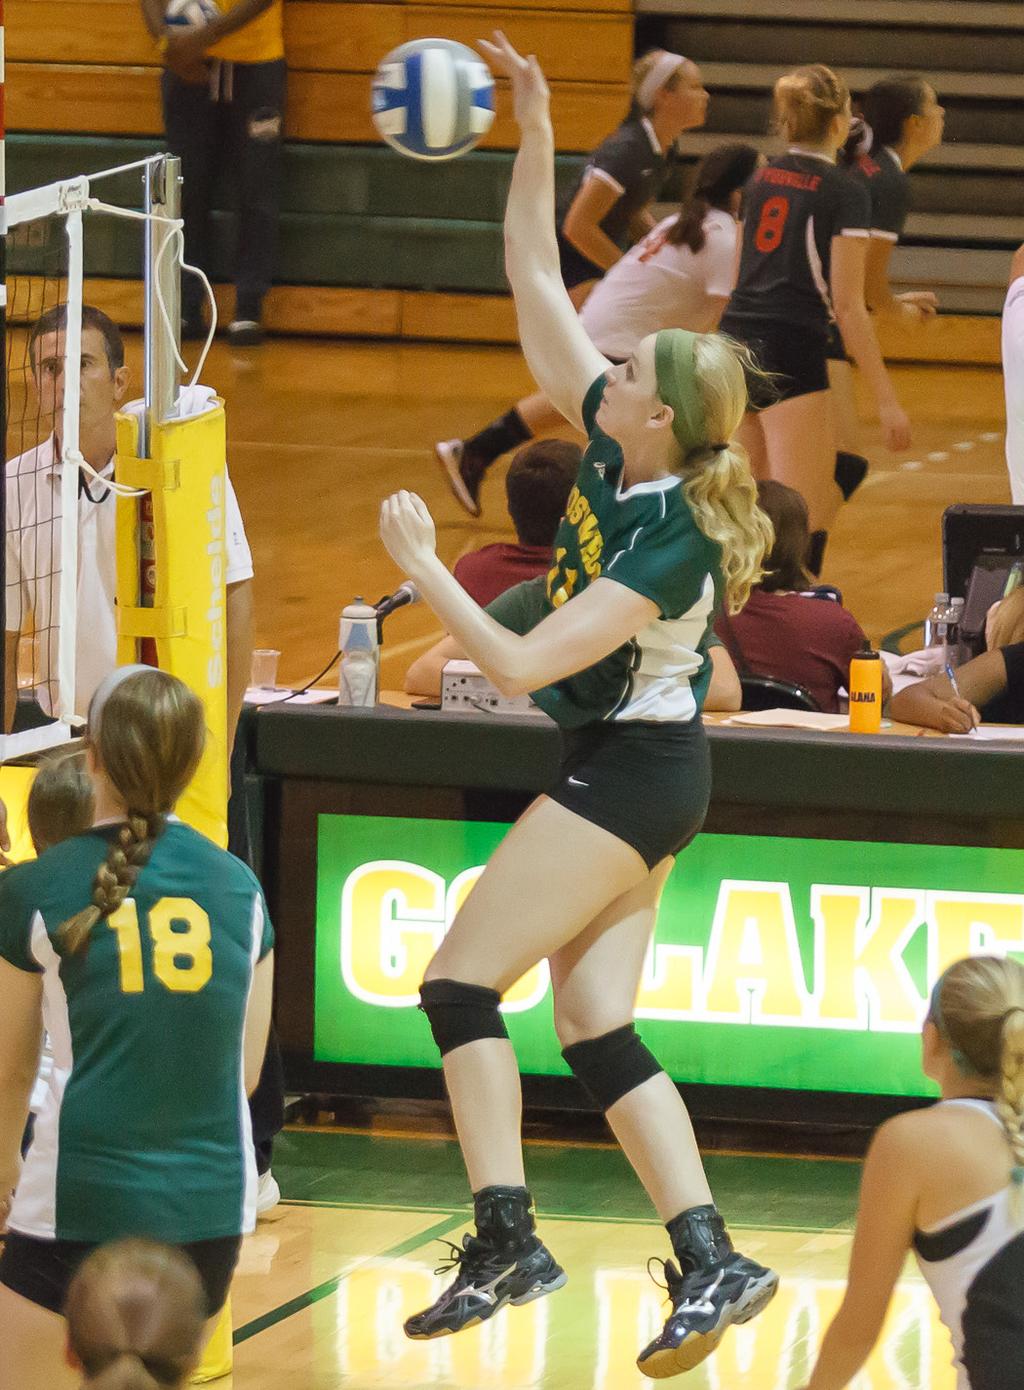 2015 SEASON IN REVIEW The Oswego State volleyball team finished its 2015 season with a record of 25-10, its best record in over 20 years.